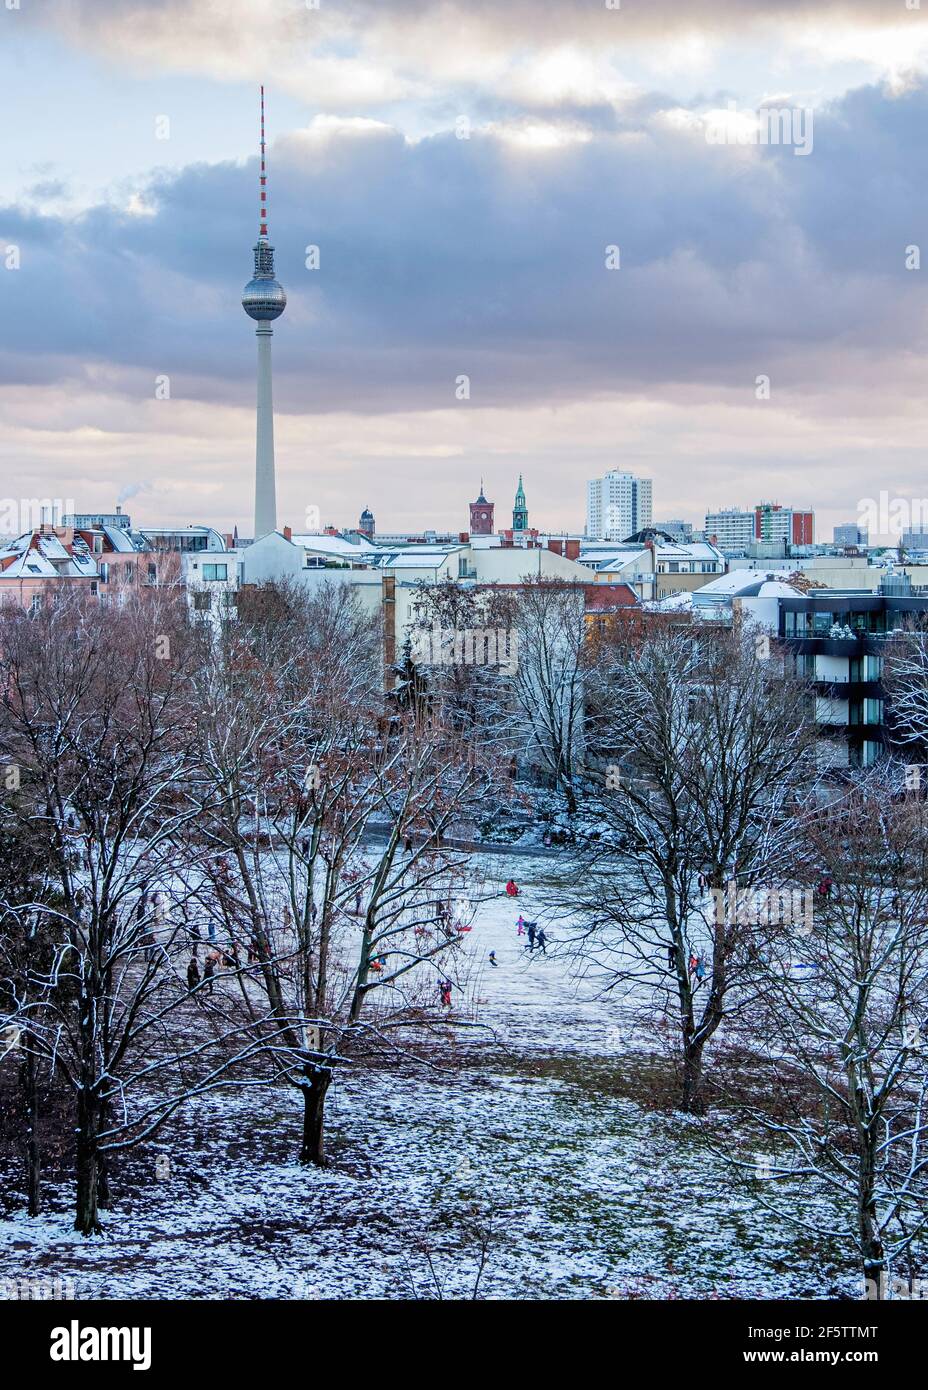 Berlin Skyline with TV tower & snow covered trees In Weinberg Park, Mitte, Berlin, Germany. Winter weather Stock Photo